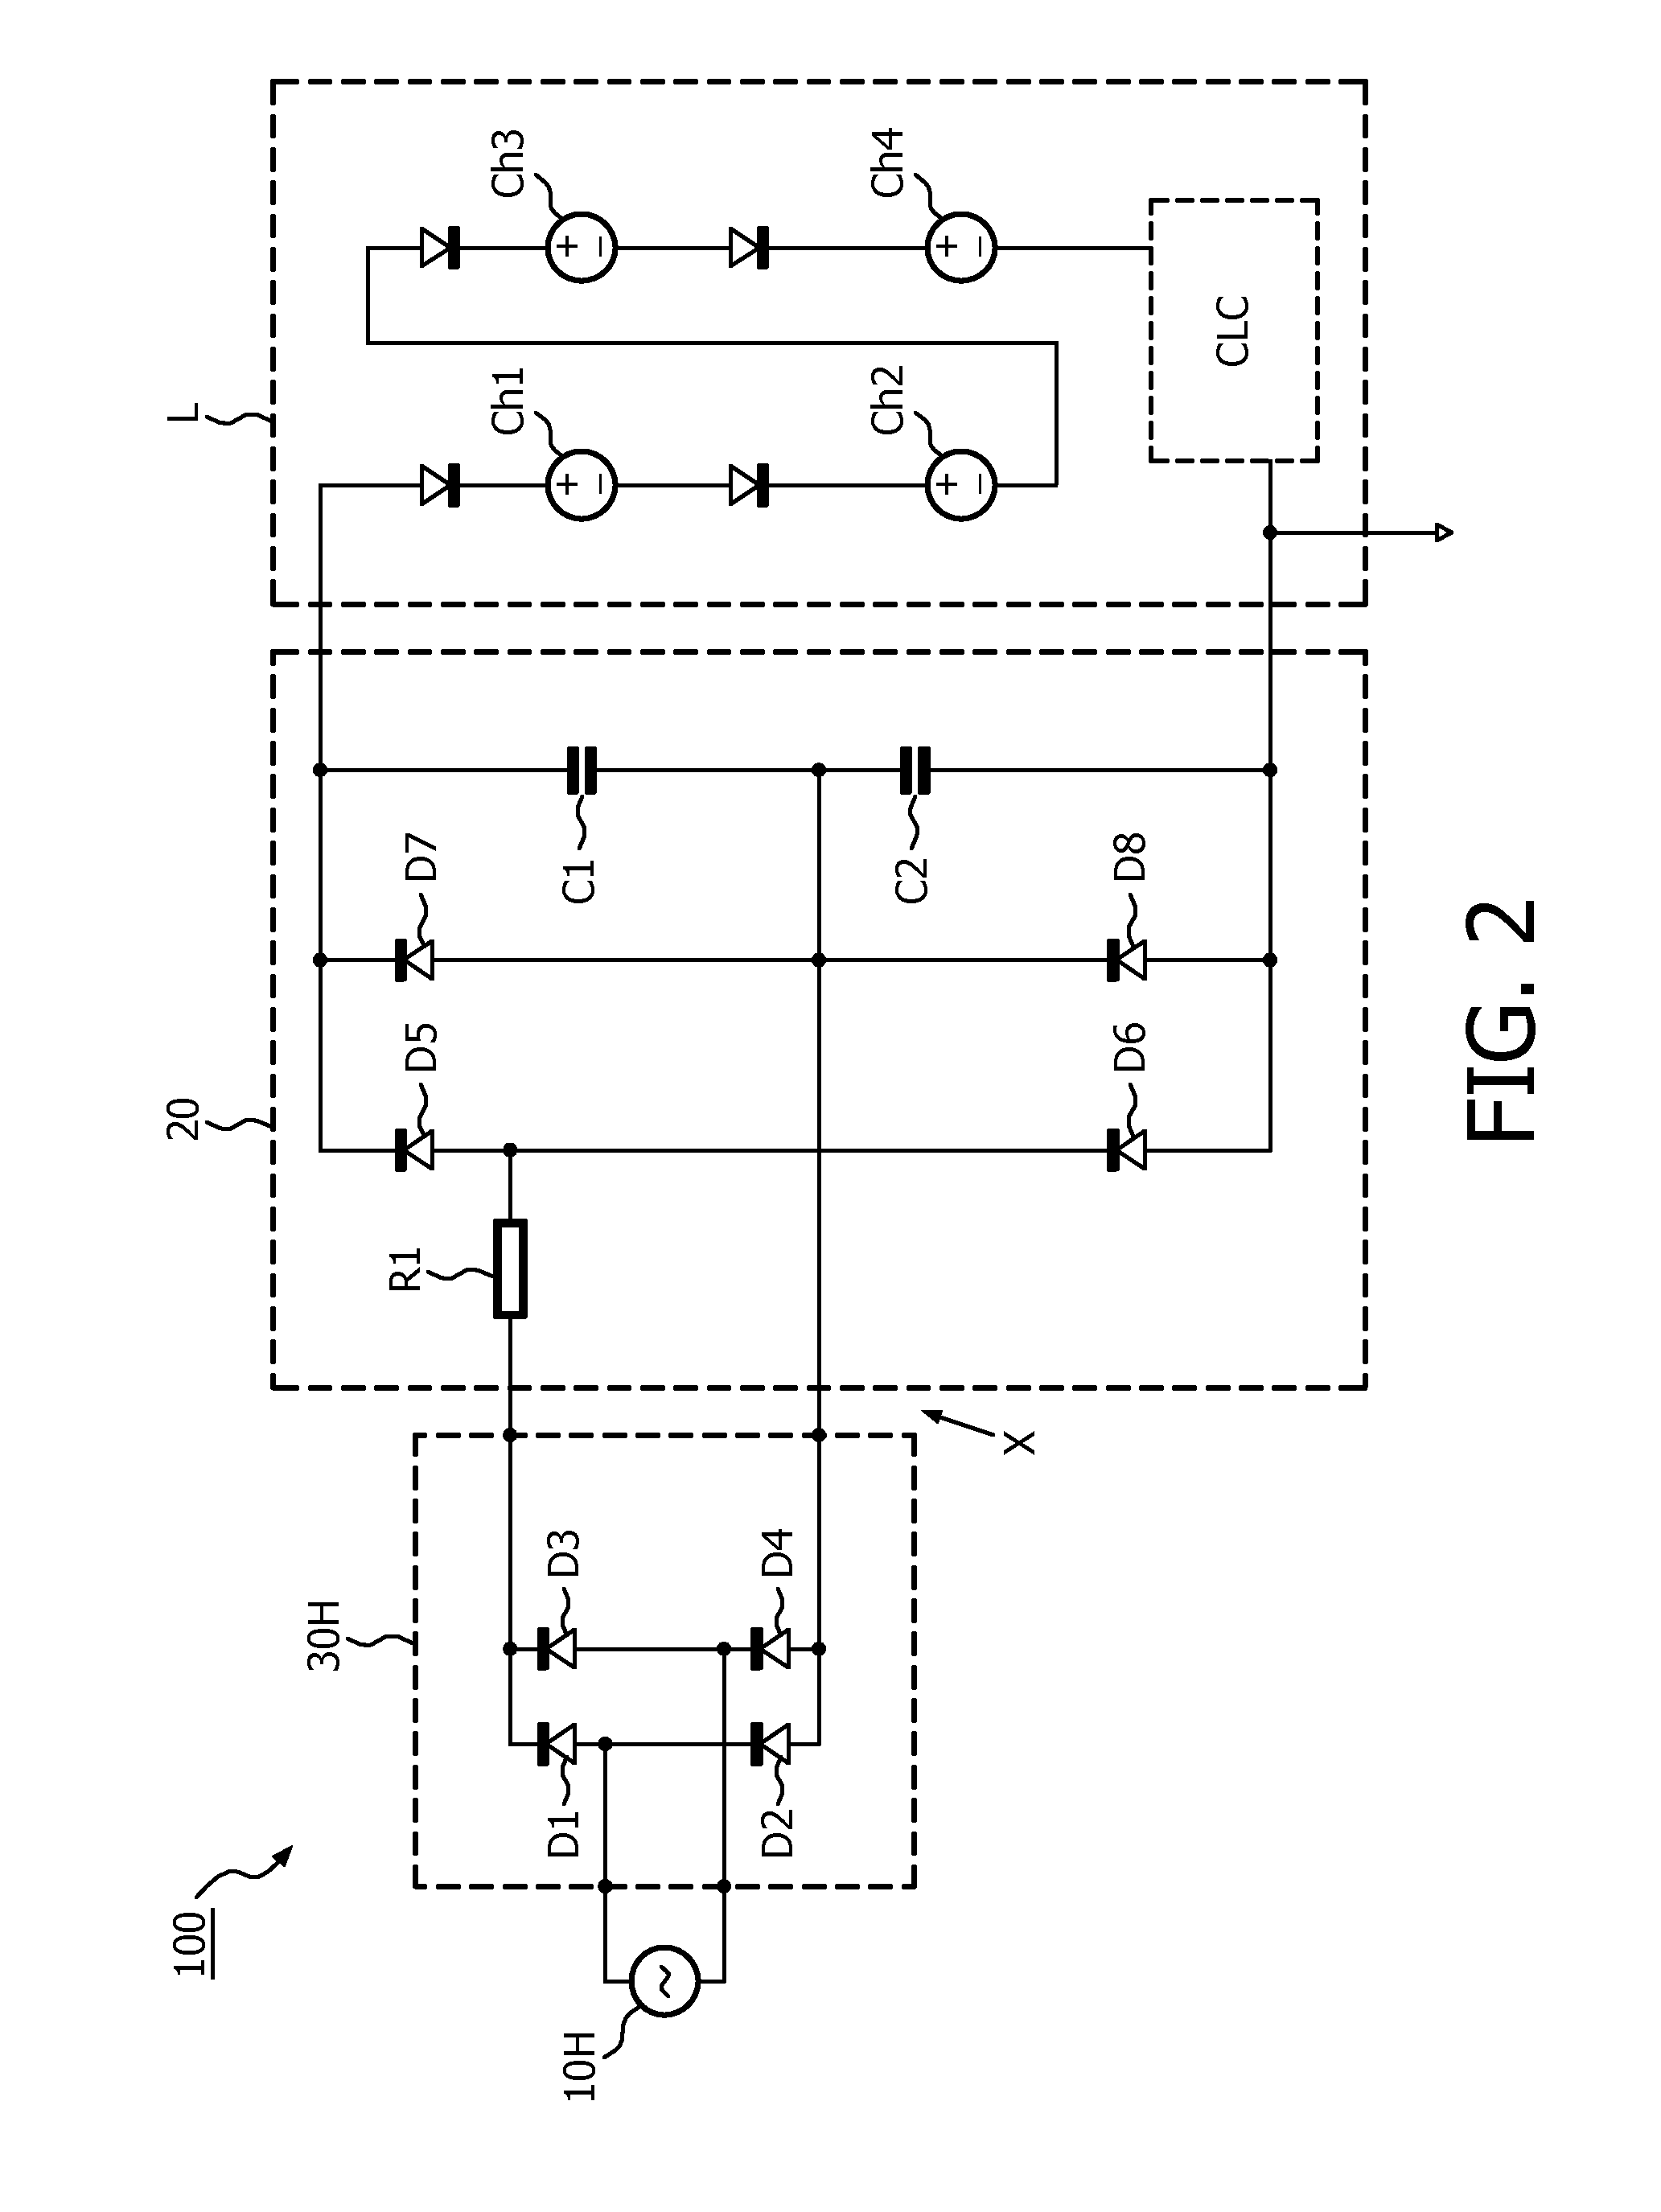 Power Supply System for Electronic Loads